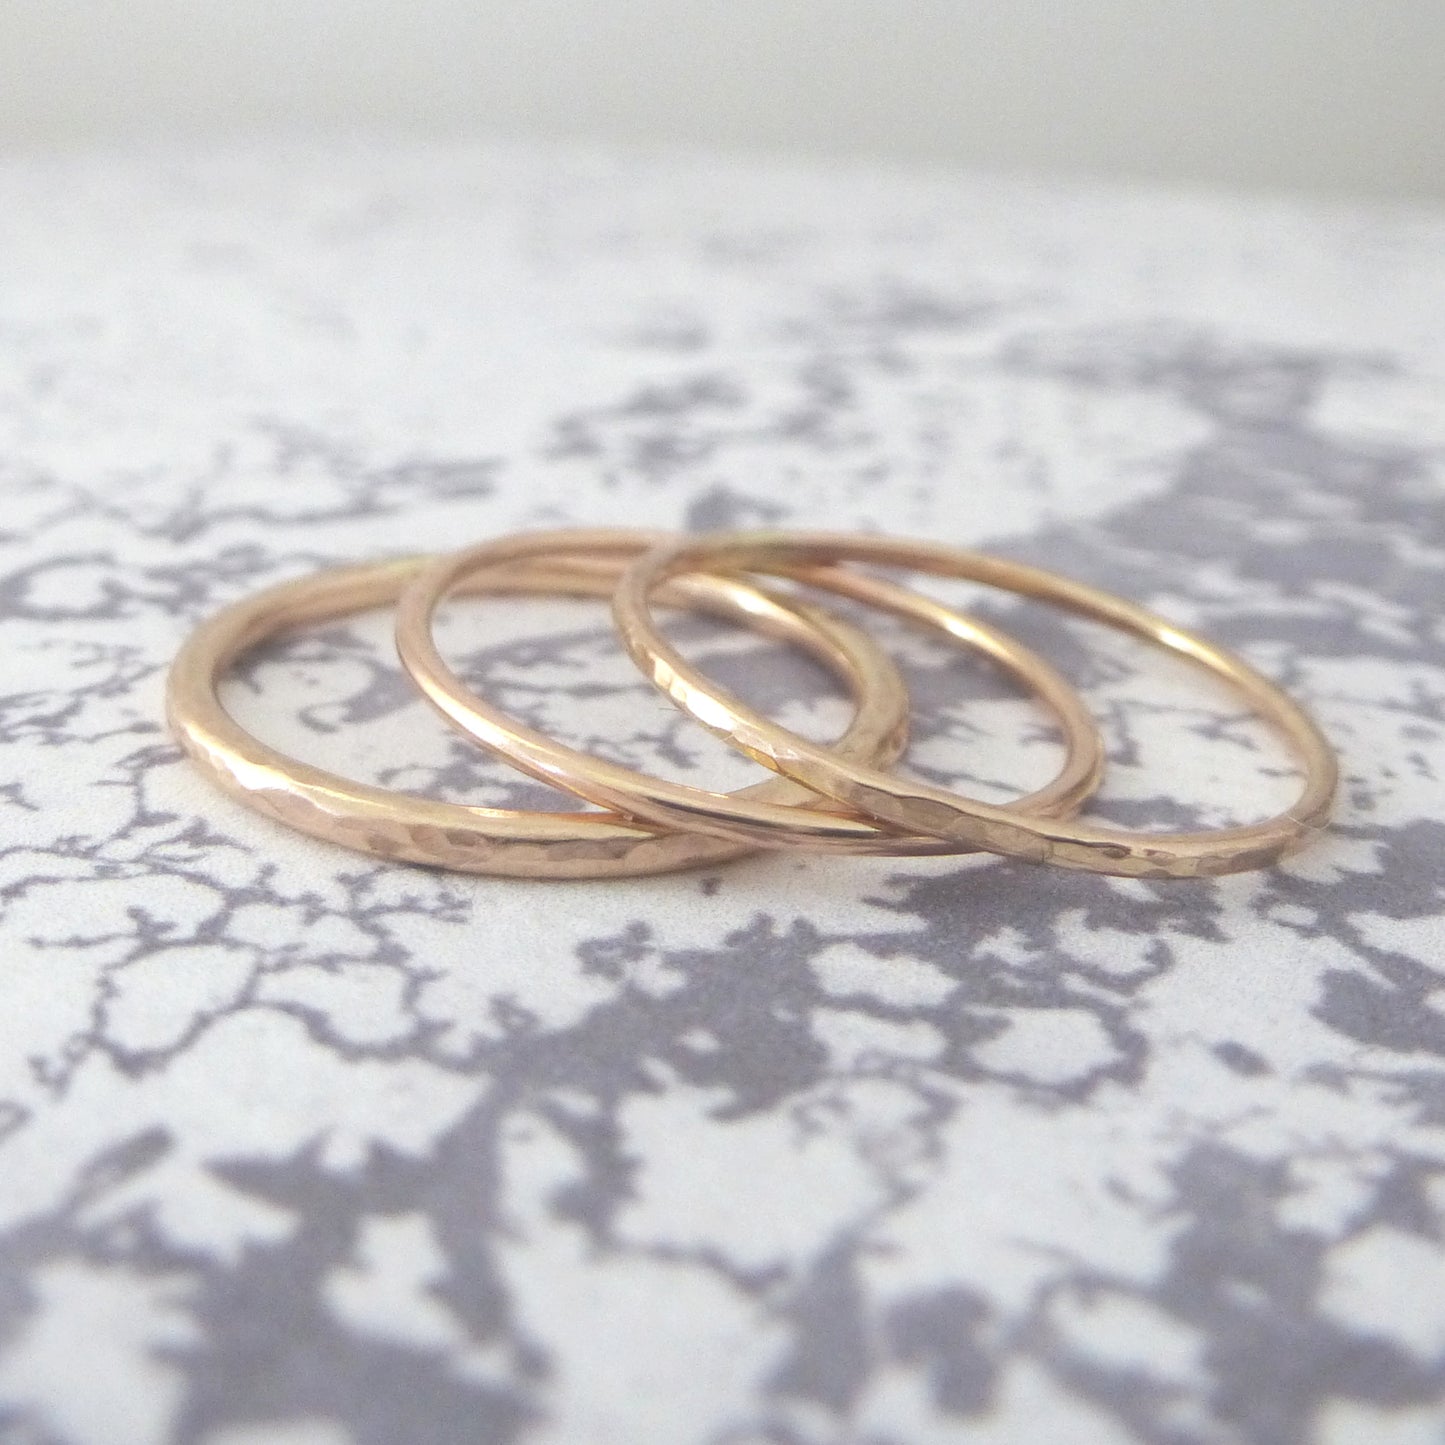 Elegant Band Ring in 9ct Gold - 1.5mm - rose - Hammered or Smooth